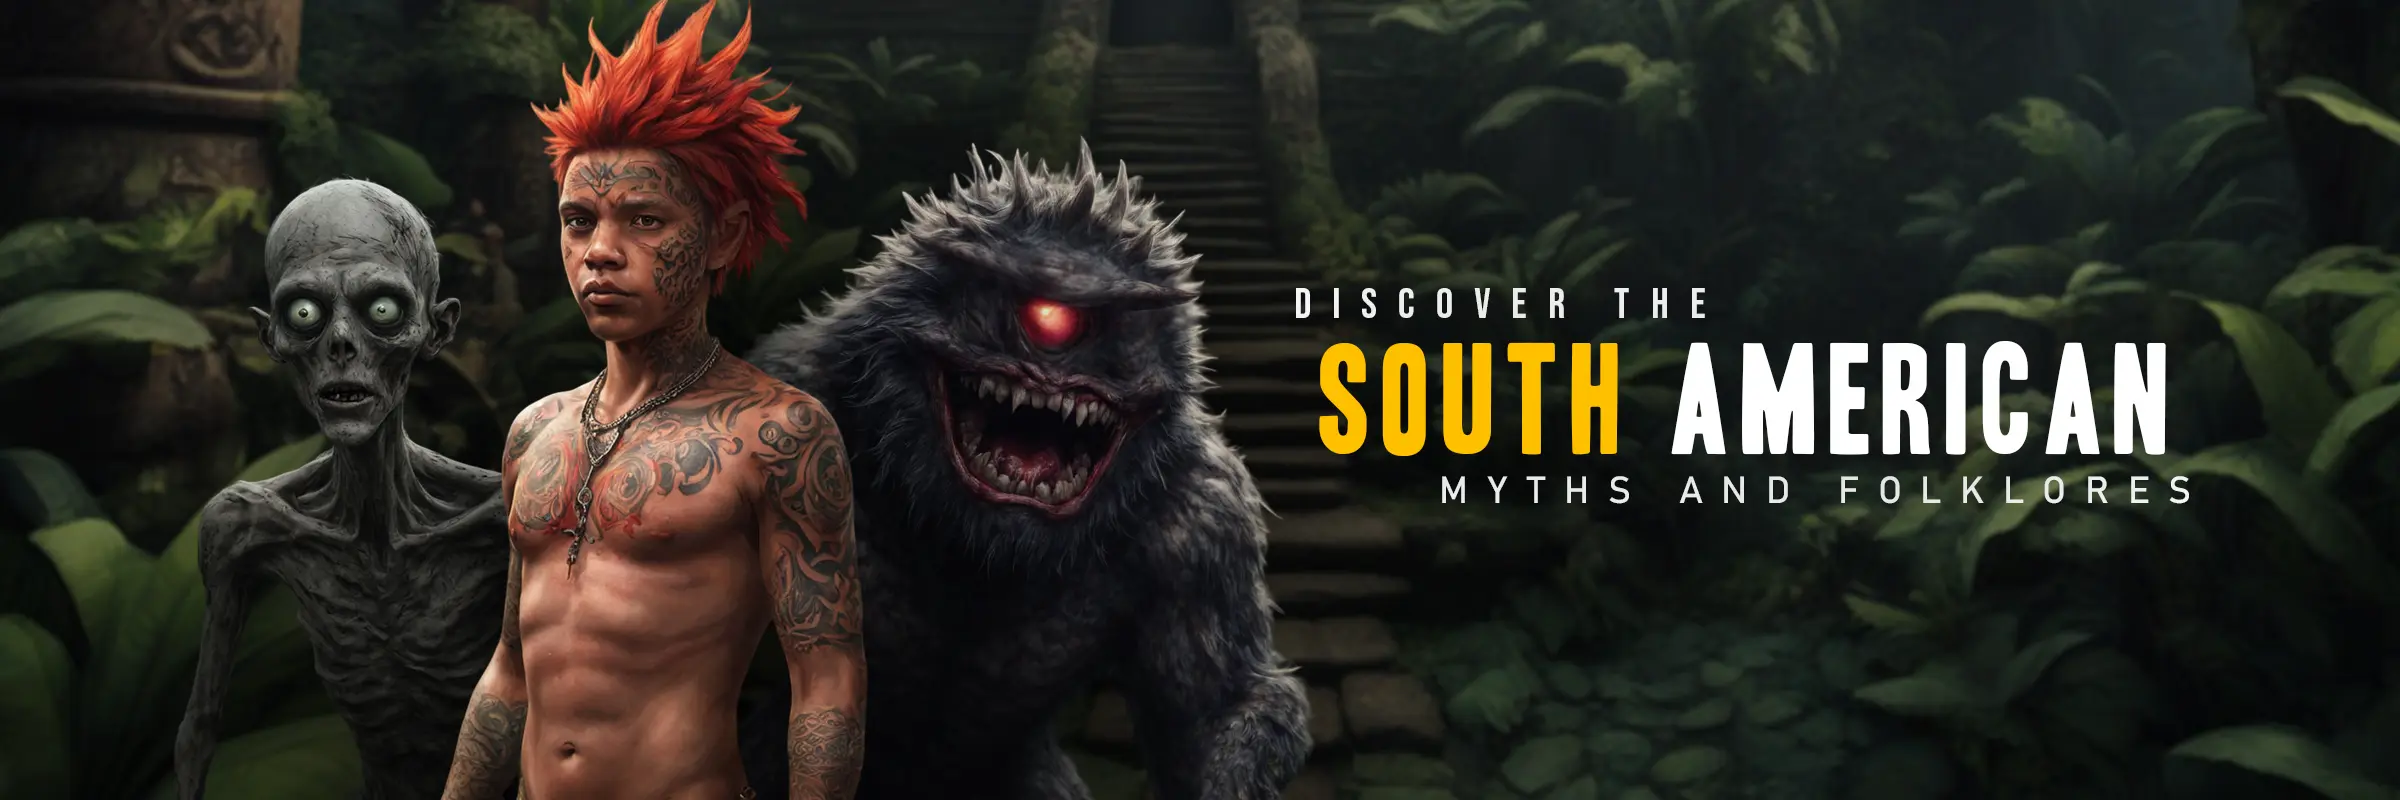 SOUTH AMERICAN MYTHS AND FOLKLORE